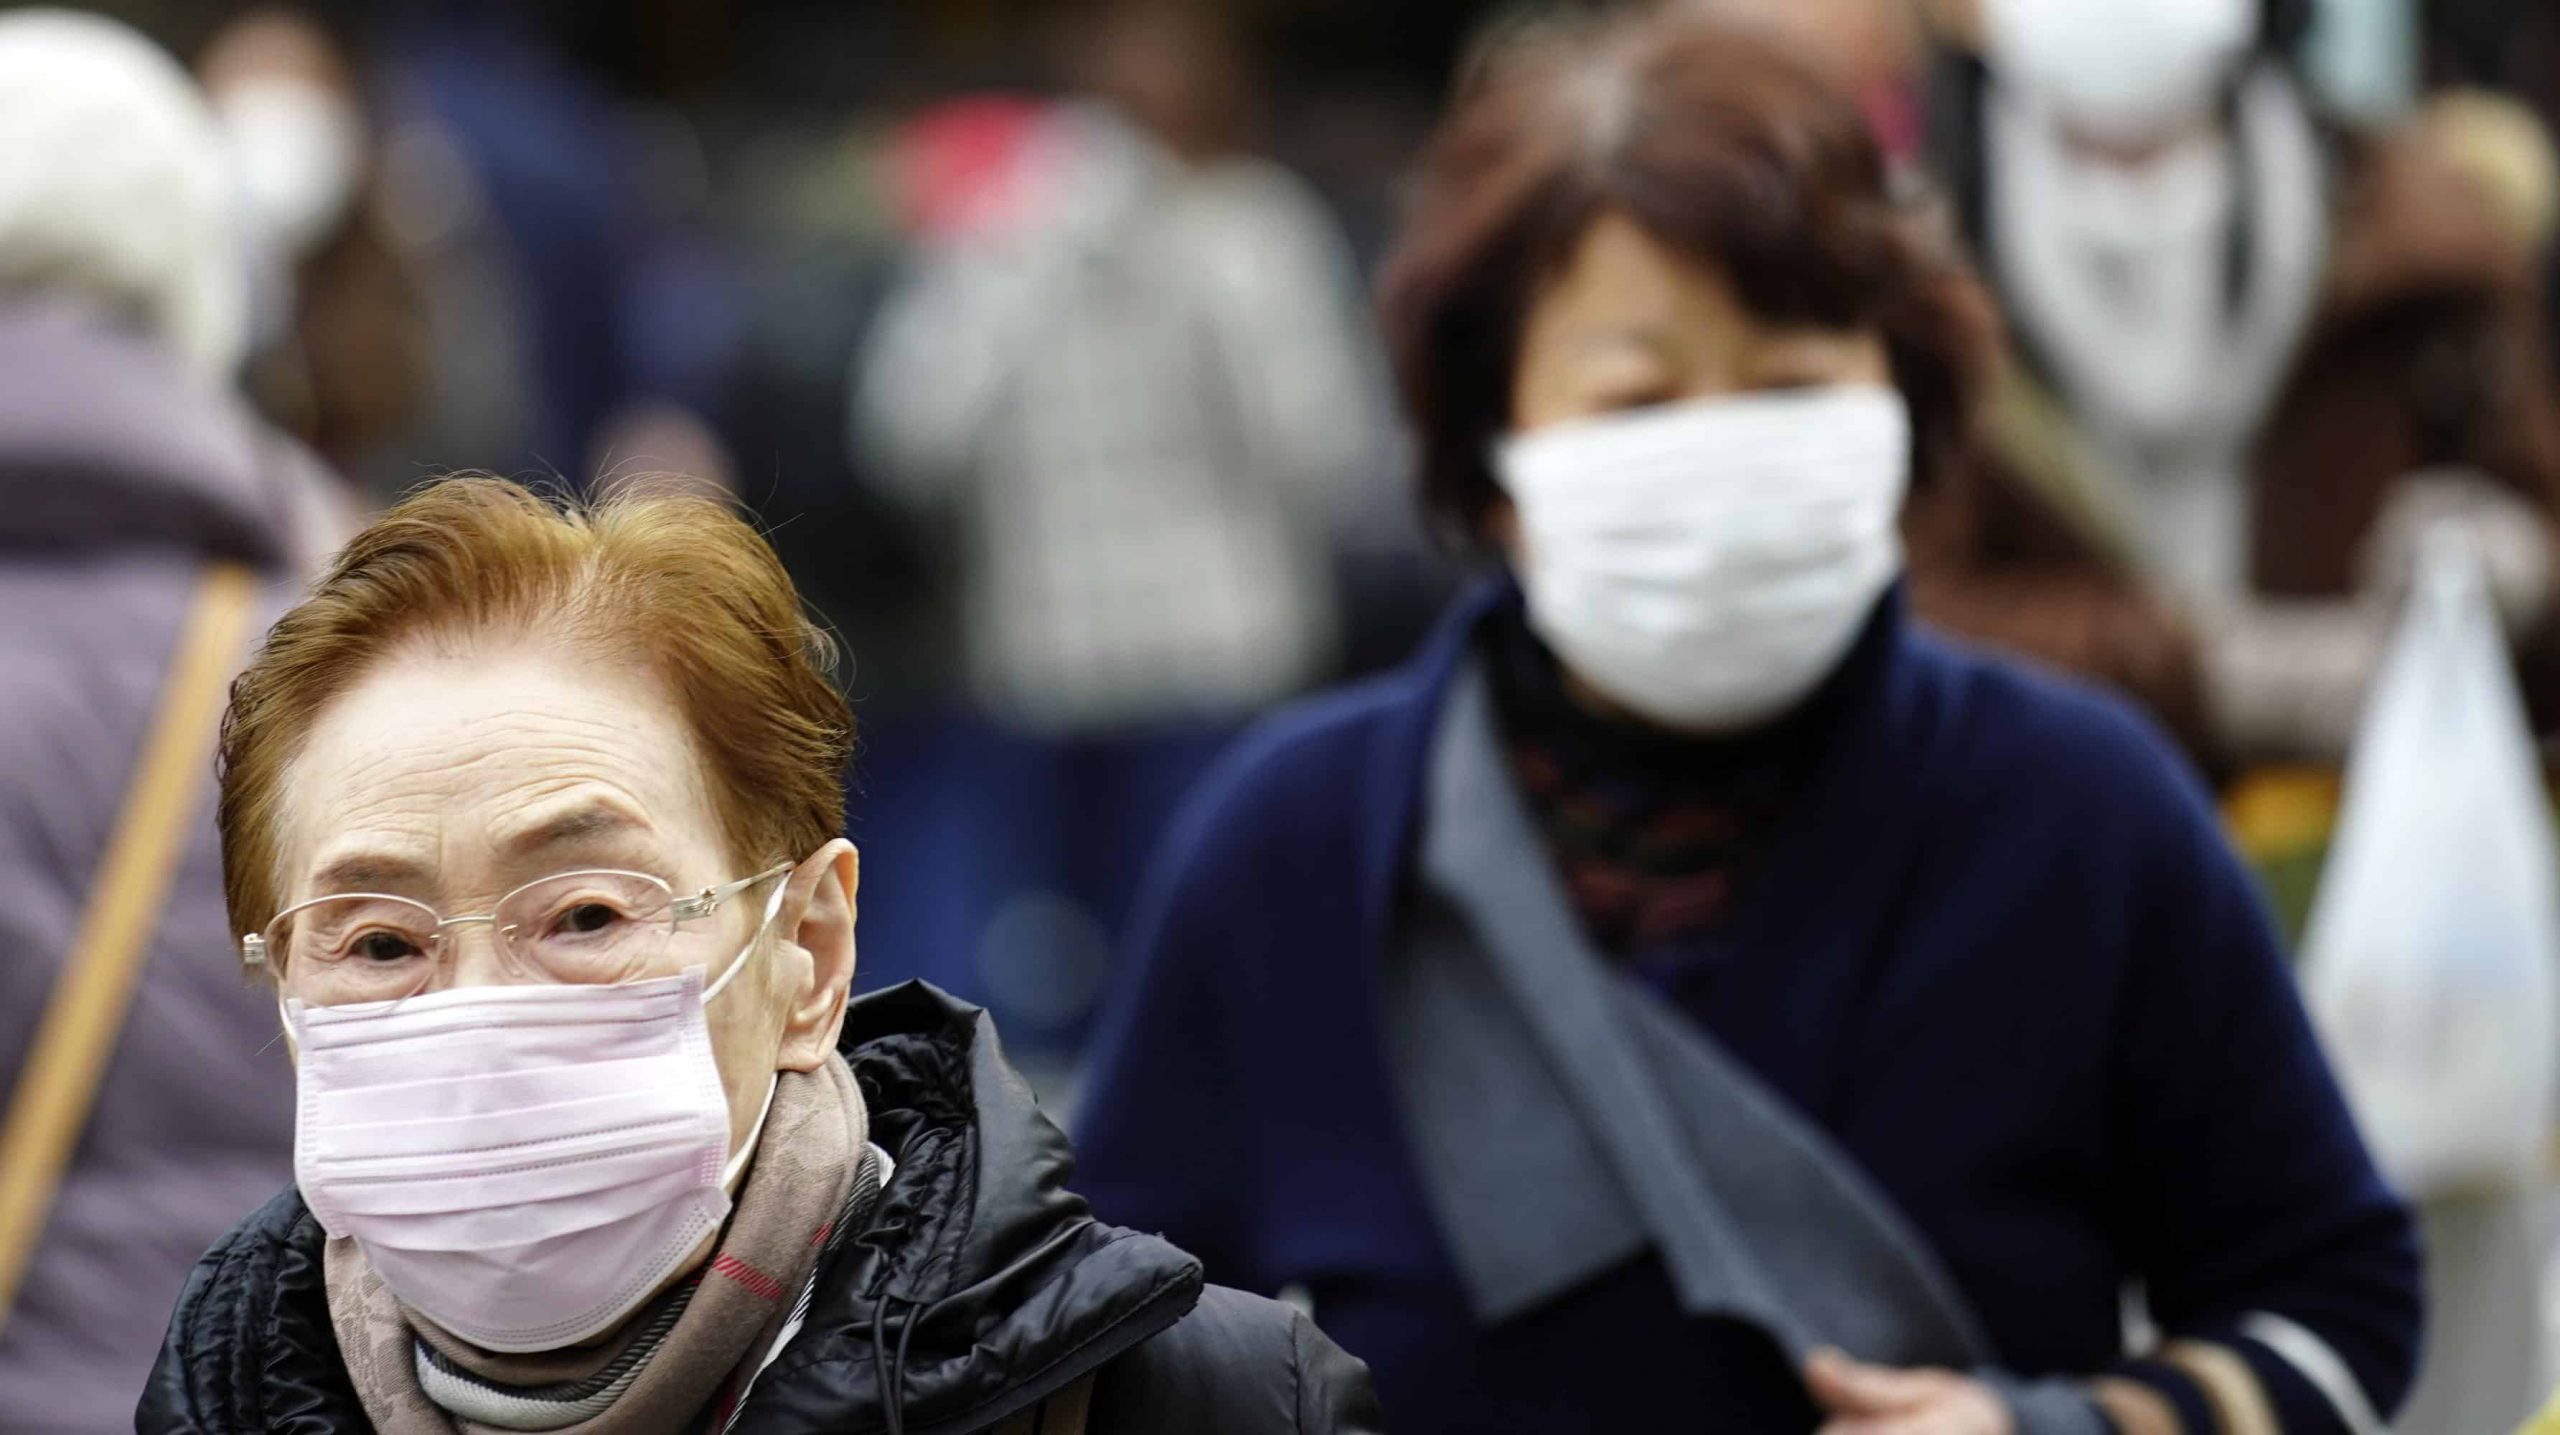 New respiratory virus spreads across China and Asia as countries start screening at airports